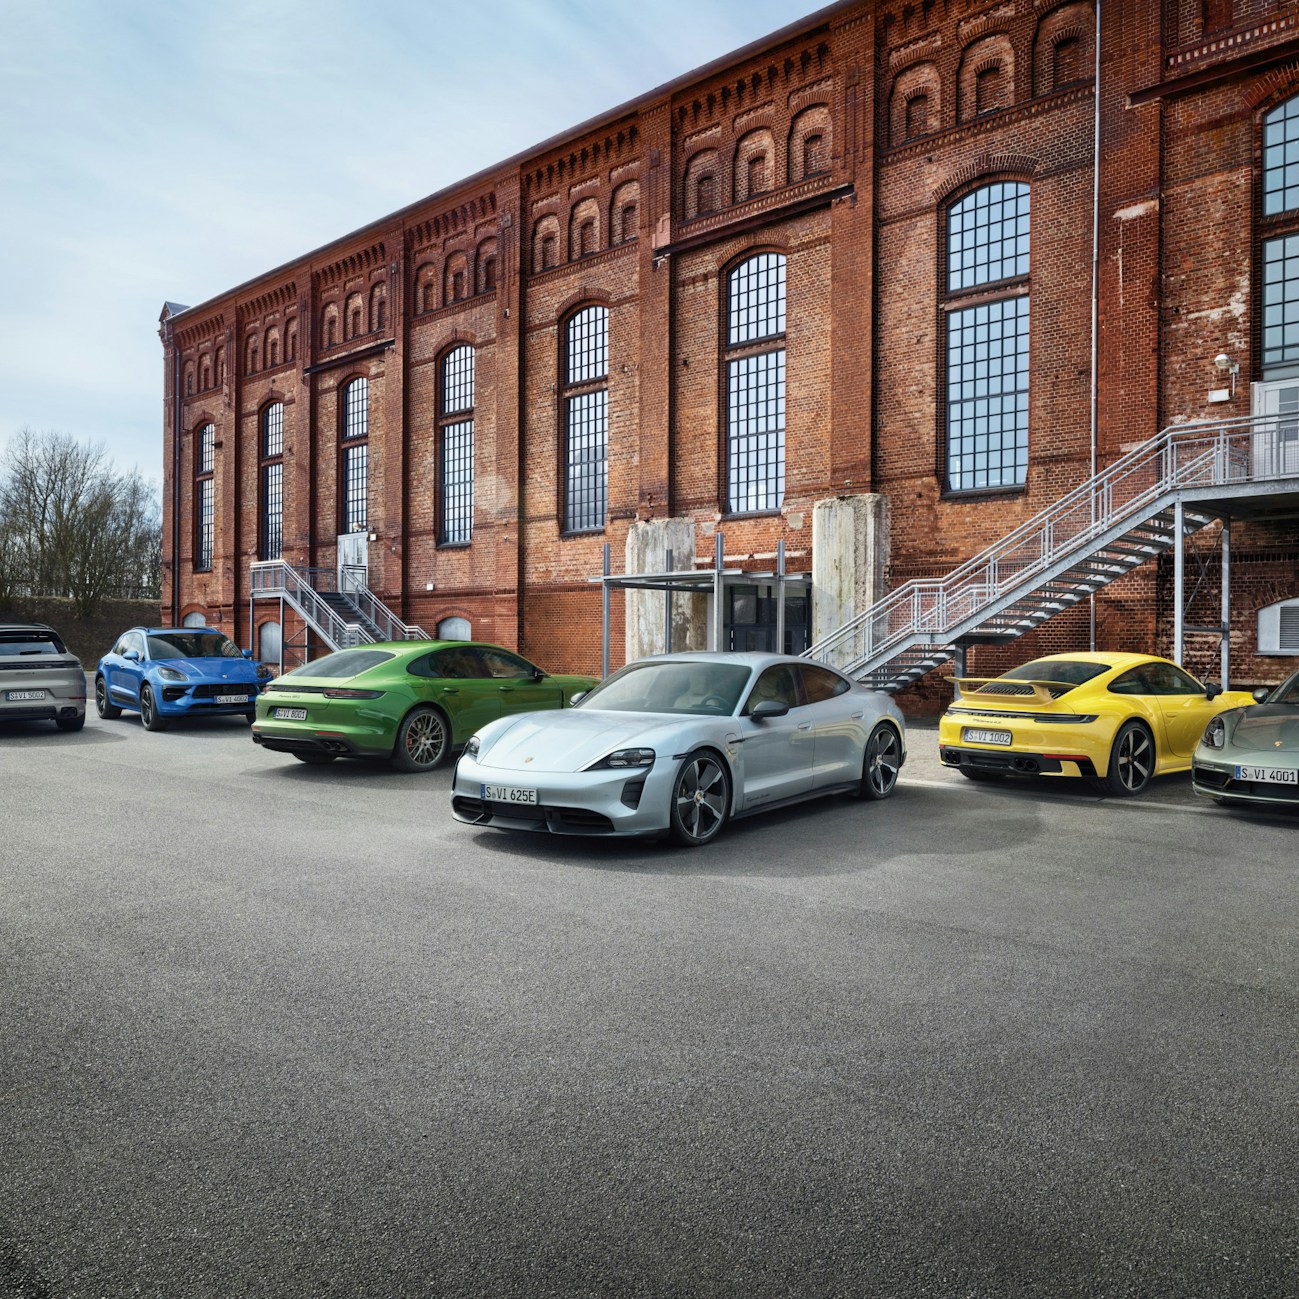 All six Porsche car models parked outside in front of a brick building.